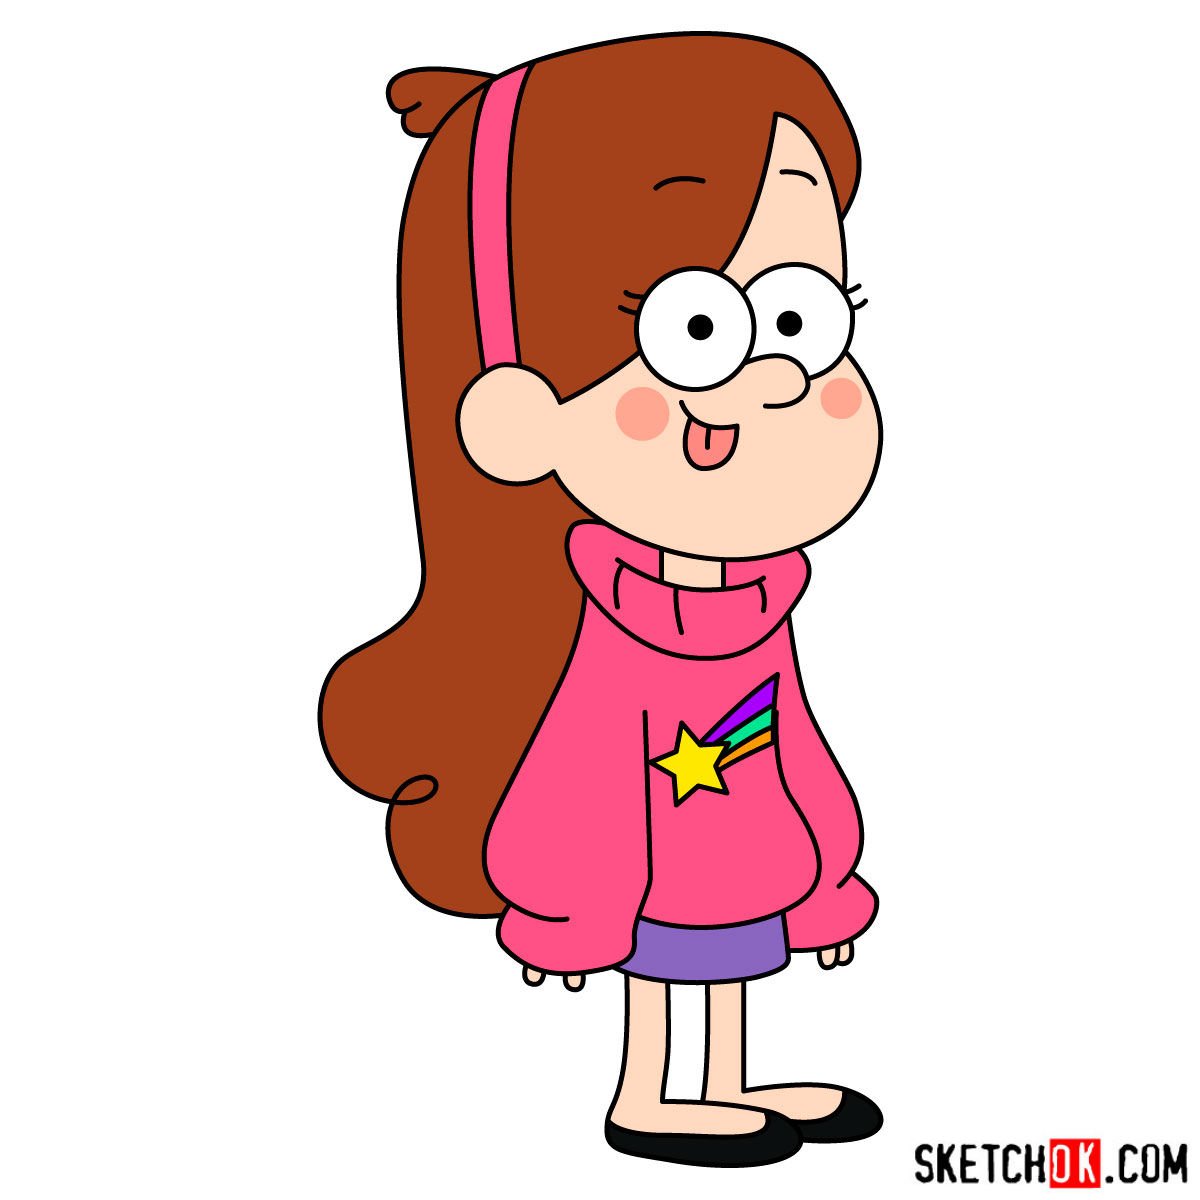 How to draw Mabel Pines